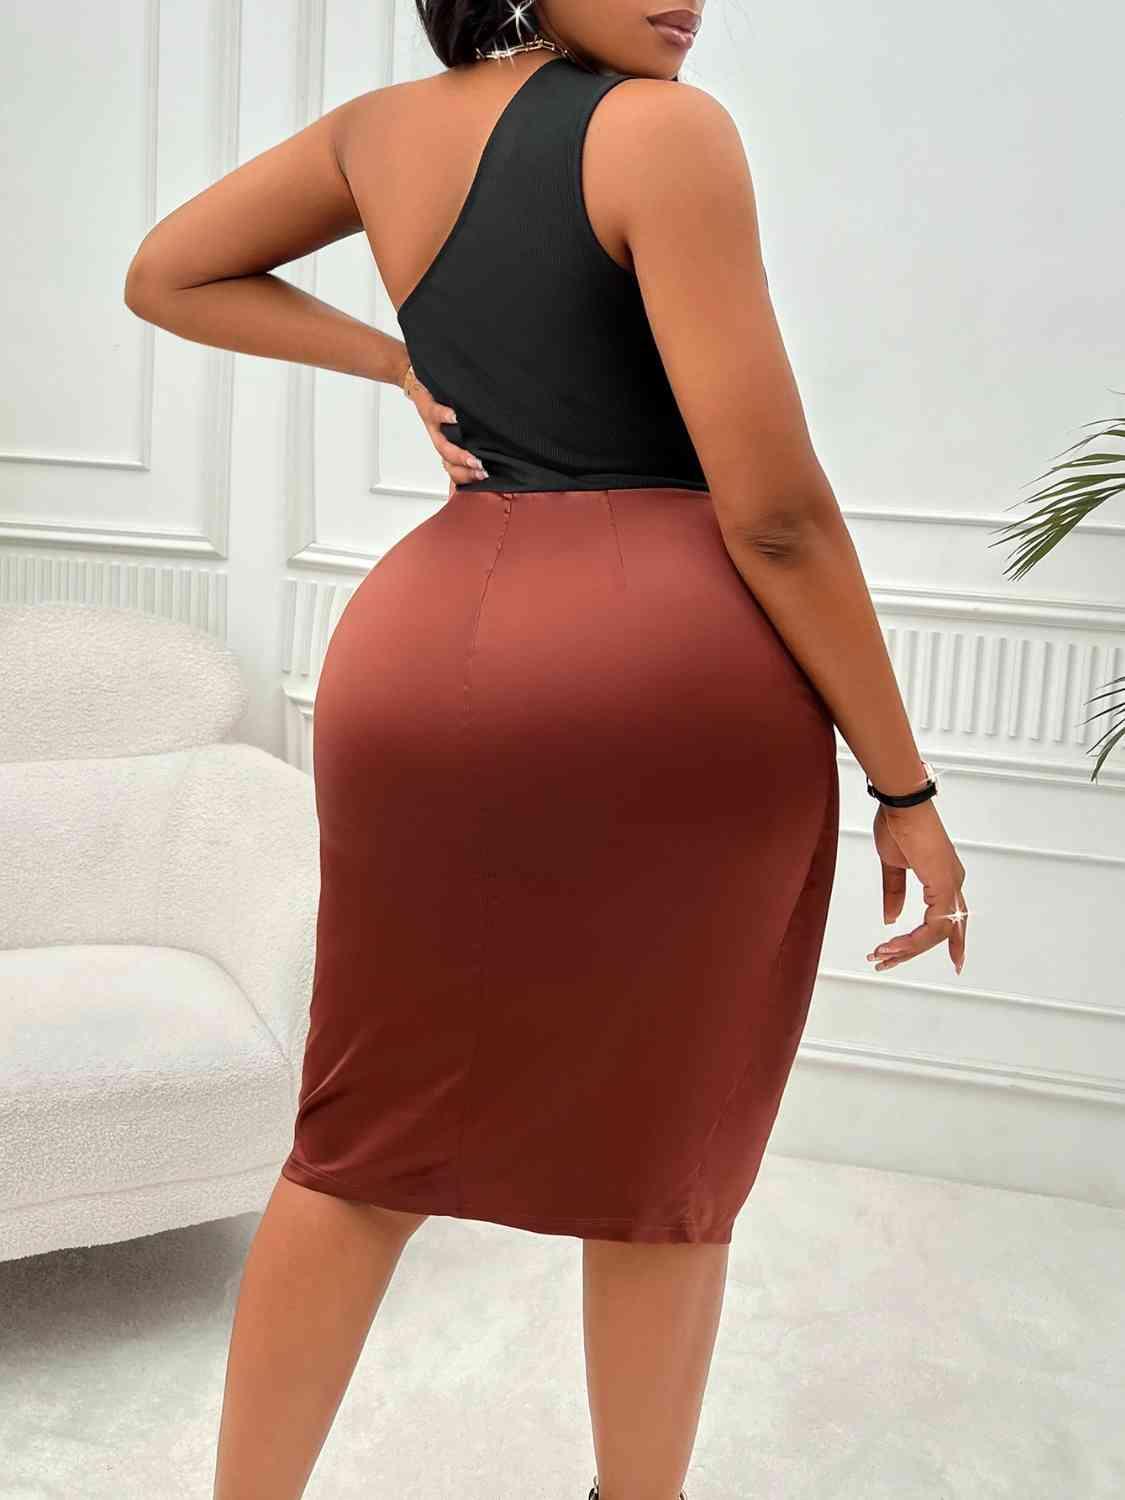 a woman in a black top and brown skirt